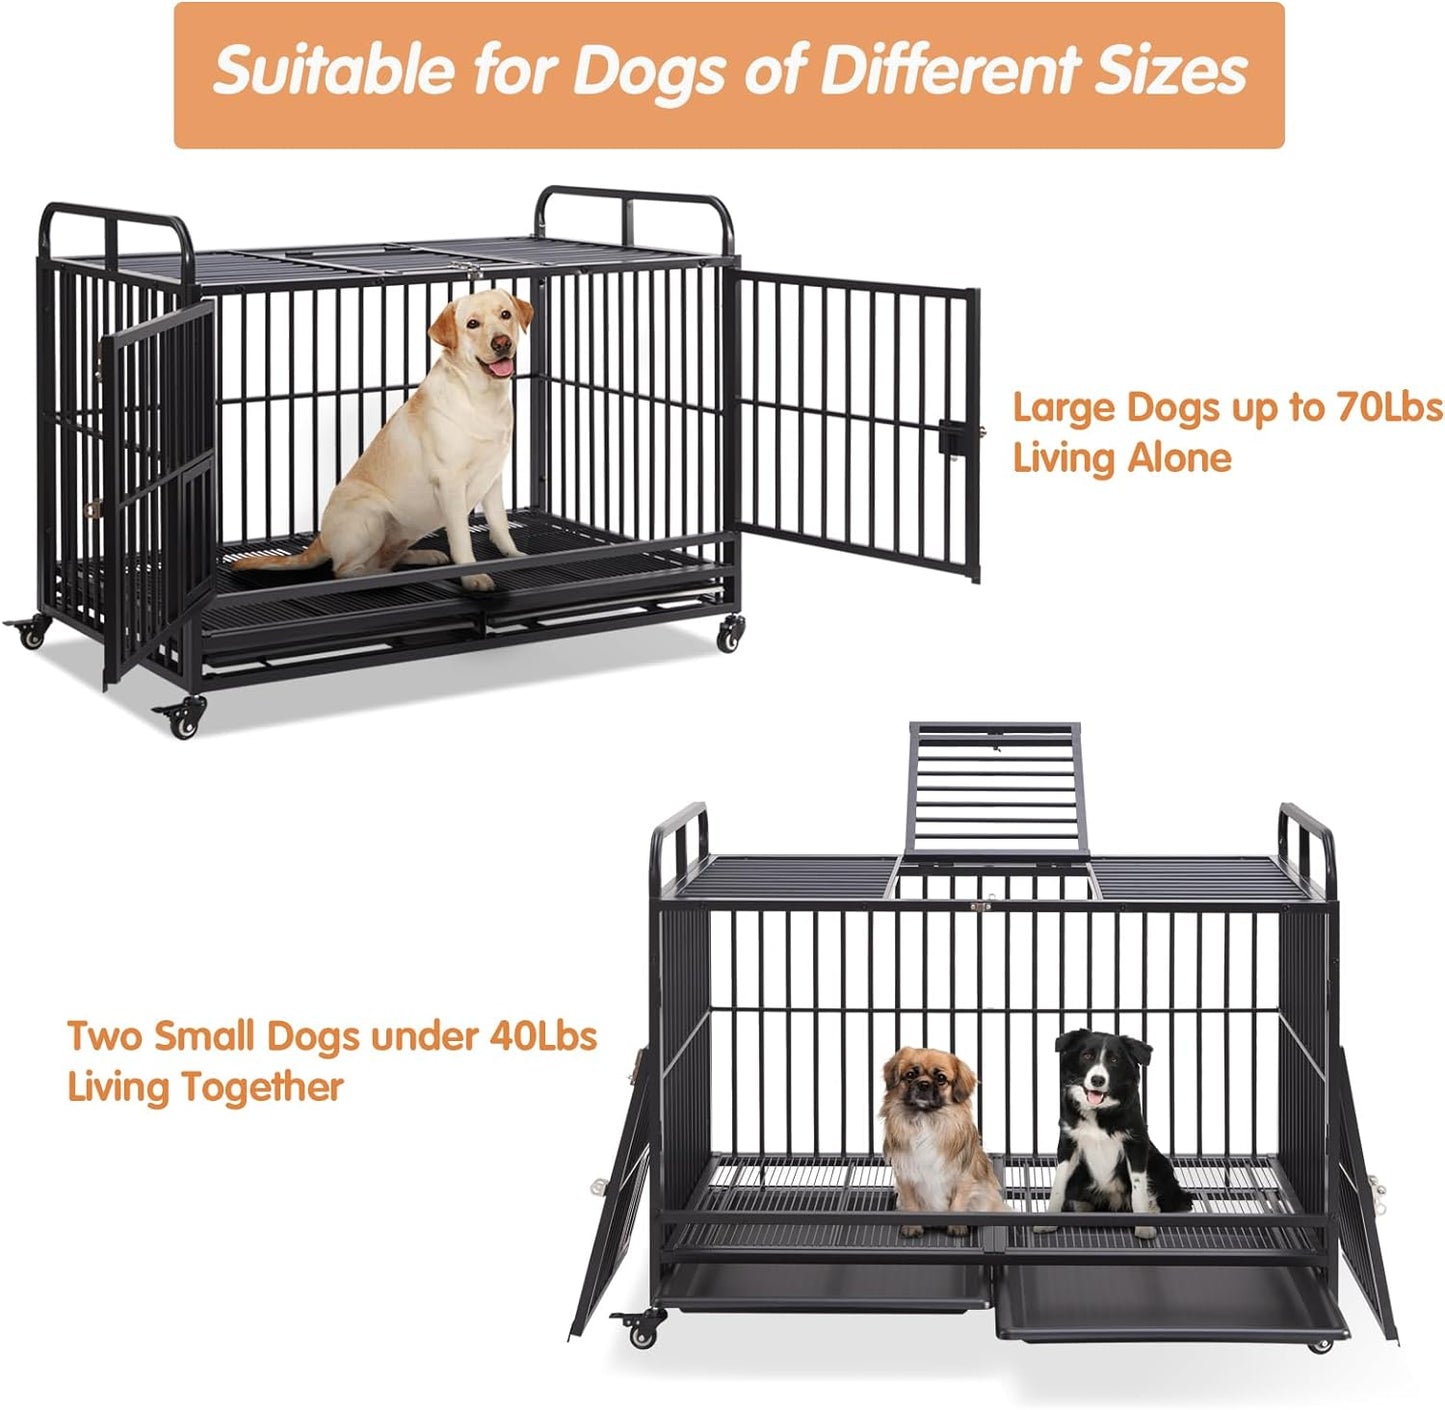 Lauren&Harold 48 Inch Heavy Duty Dog Crate Furniture for Large Medium Dogs, Indestructible Dog Kennel Indoor with Wheels&Removable Tray, Escape-Proof